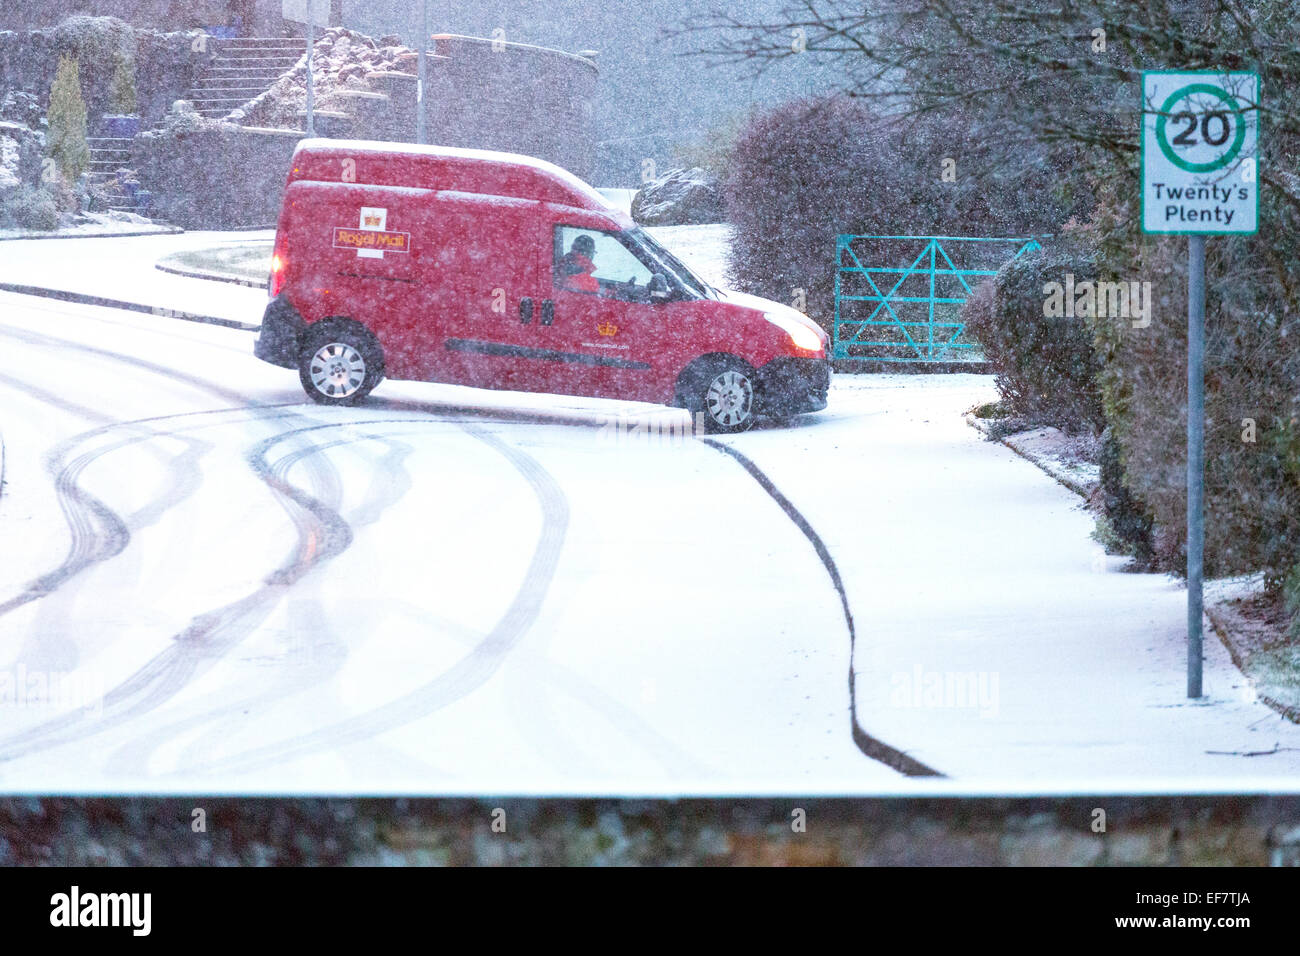 Lochwinnoch, Renfrewshire, Scotland, UK. 28th January, 2015. UK Weather: With heavy snow forecasted to fall overnight it begins to cover the ground as a as a postman drives around to pick up letters from mail boxes Stock Photo